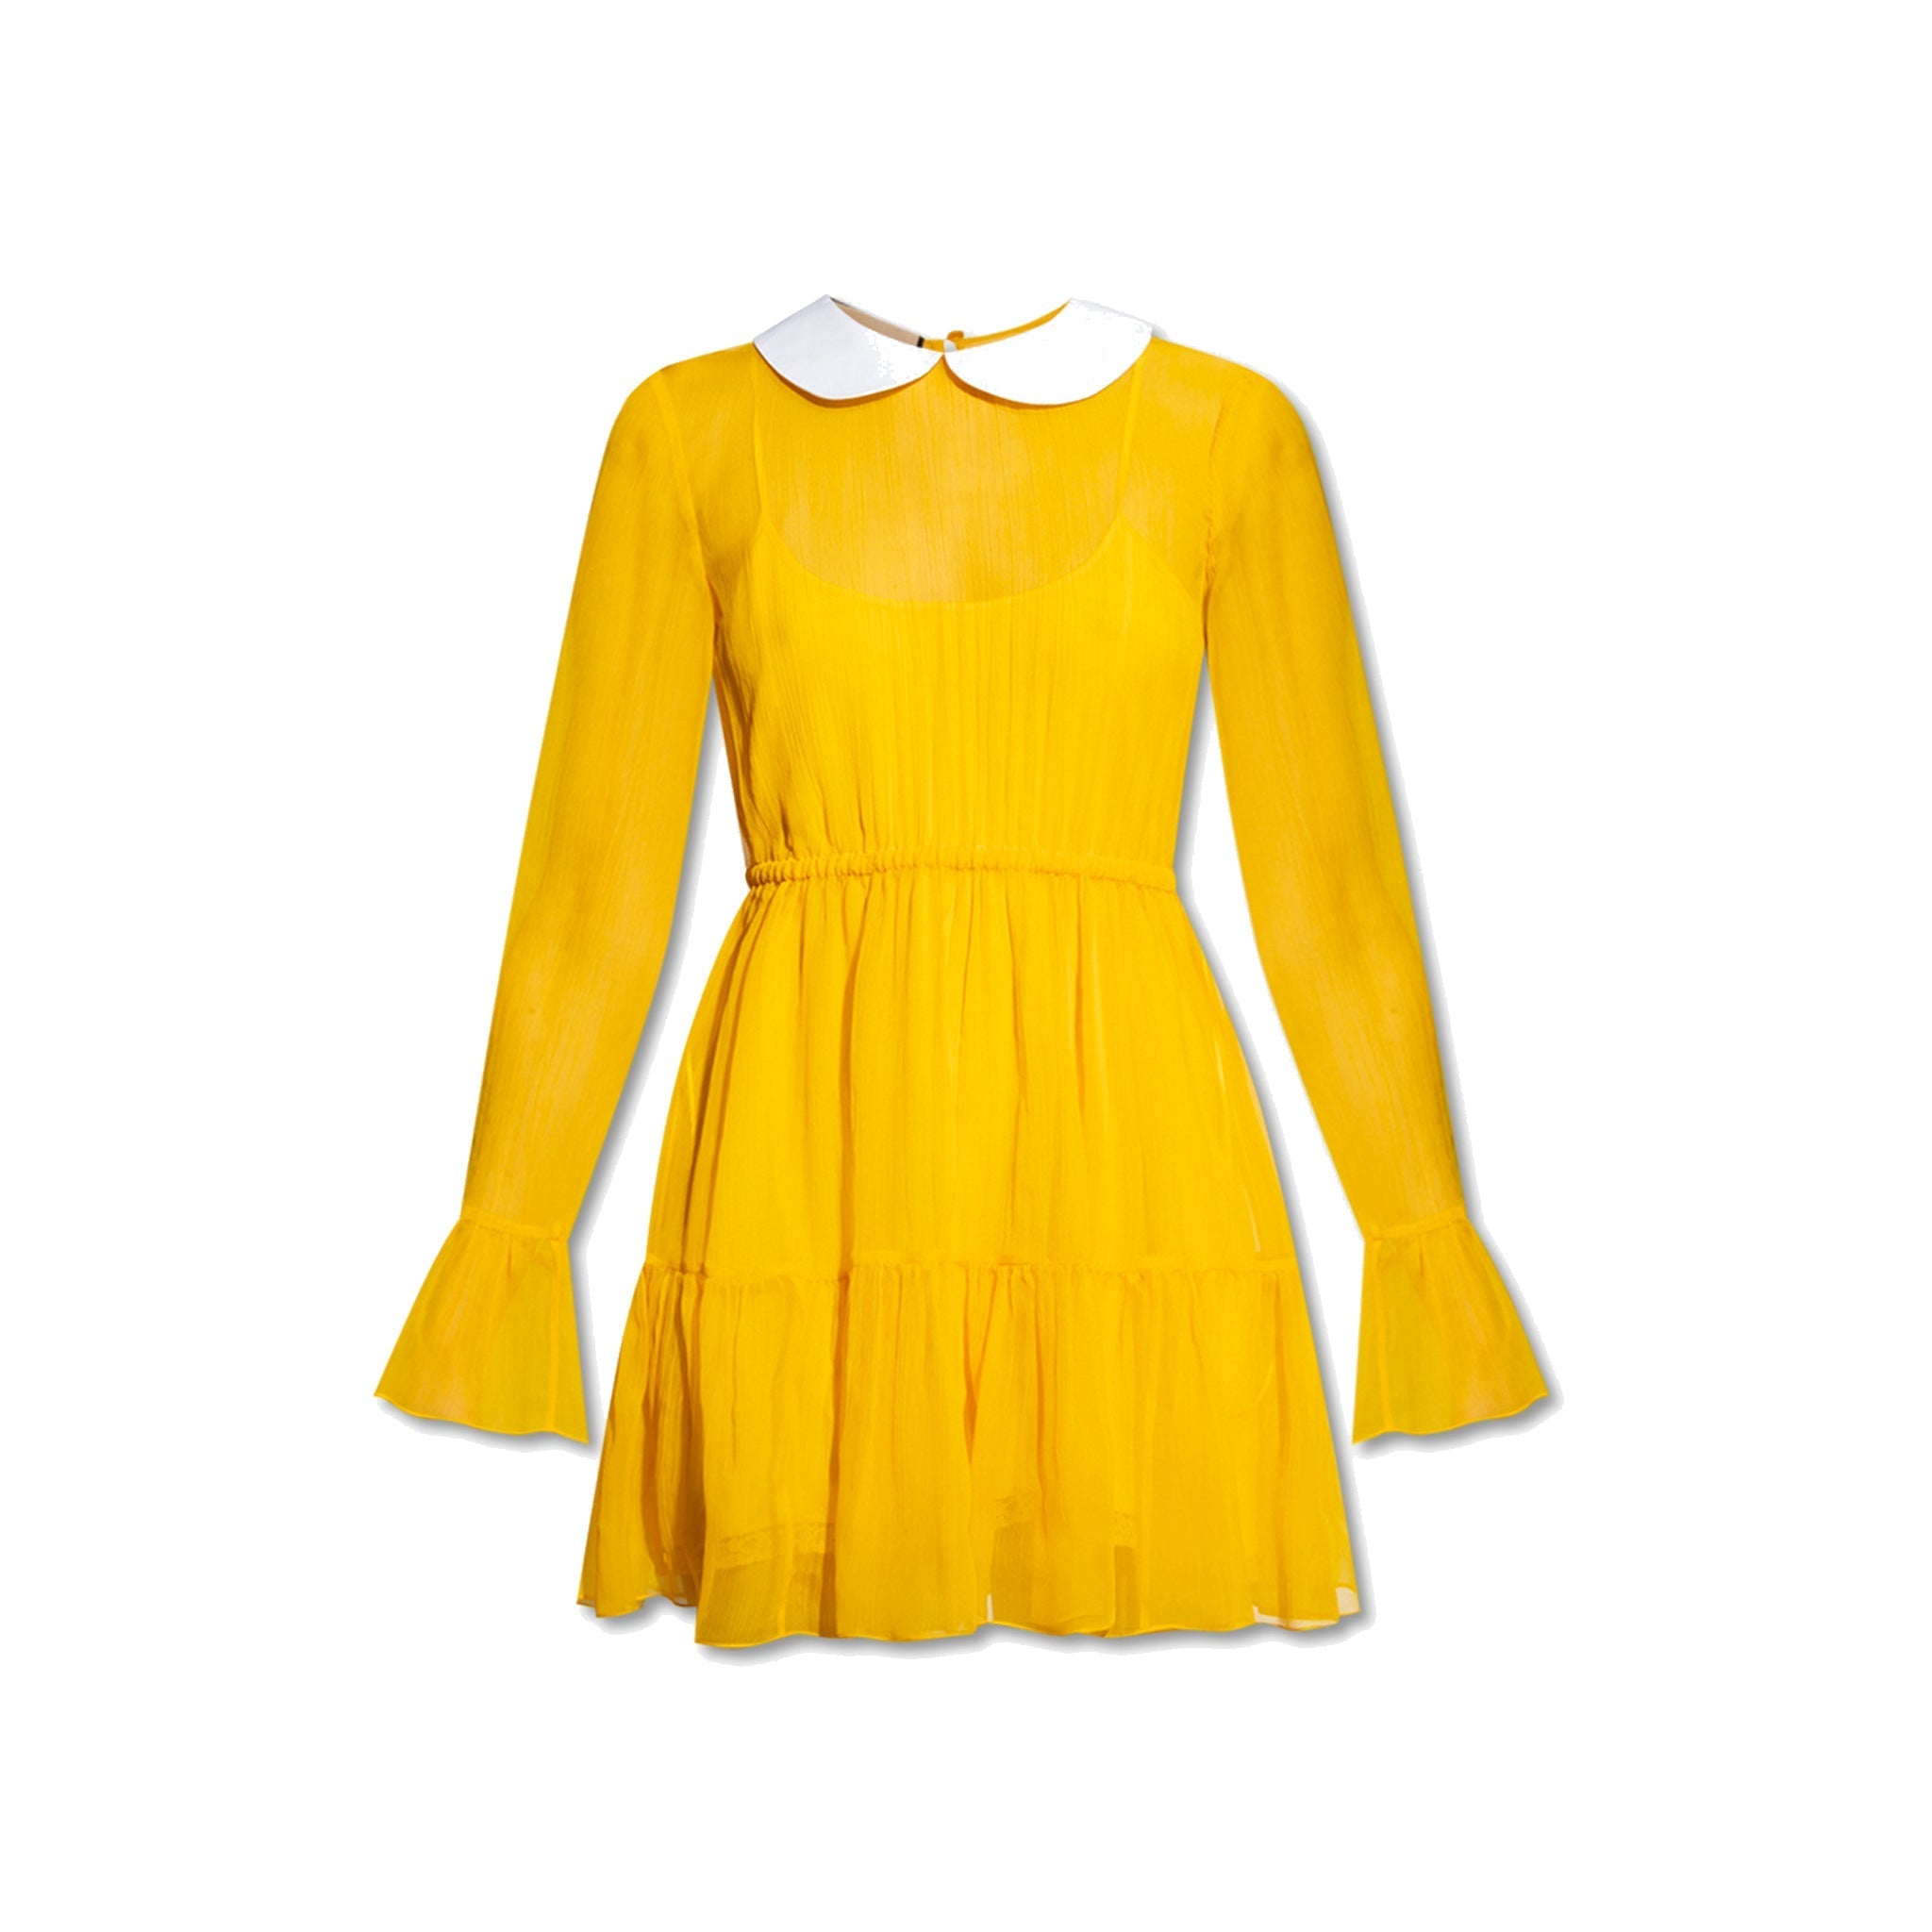 GUCCI-OUTLET-SALE-Gucci-Silk-Chiffon-Dress-WOMEN-CLOTHING-YELLOW-42-ARCHIVE-COLLECTION.jpg